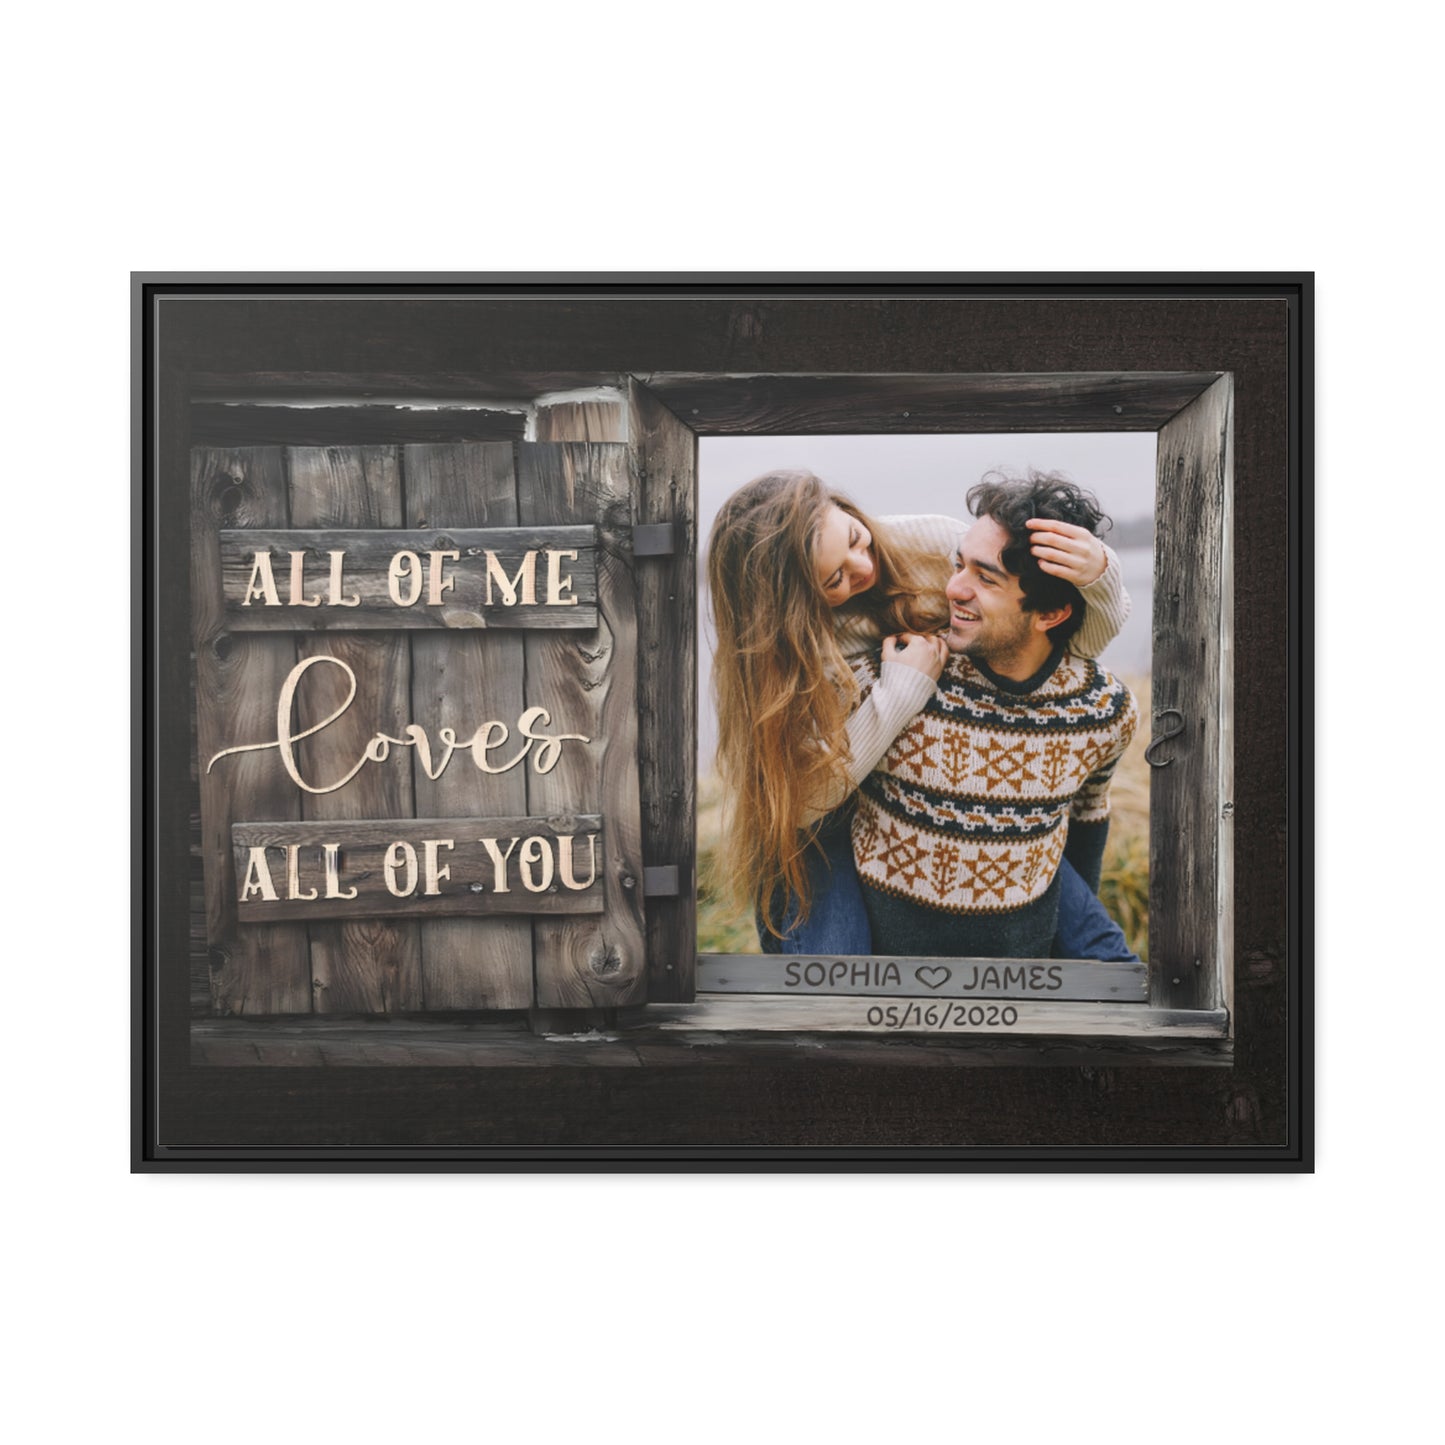 All Of Me Loves All Of You - Personalized Wedding Anniversary Gift For Him For Her - Custom Couple Photo Canvas Print - Mymindfulgifts